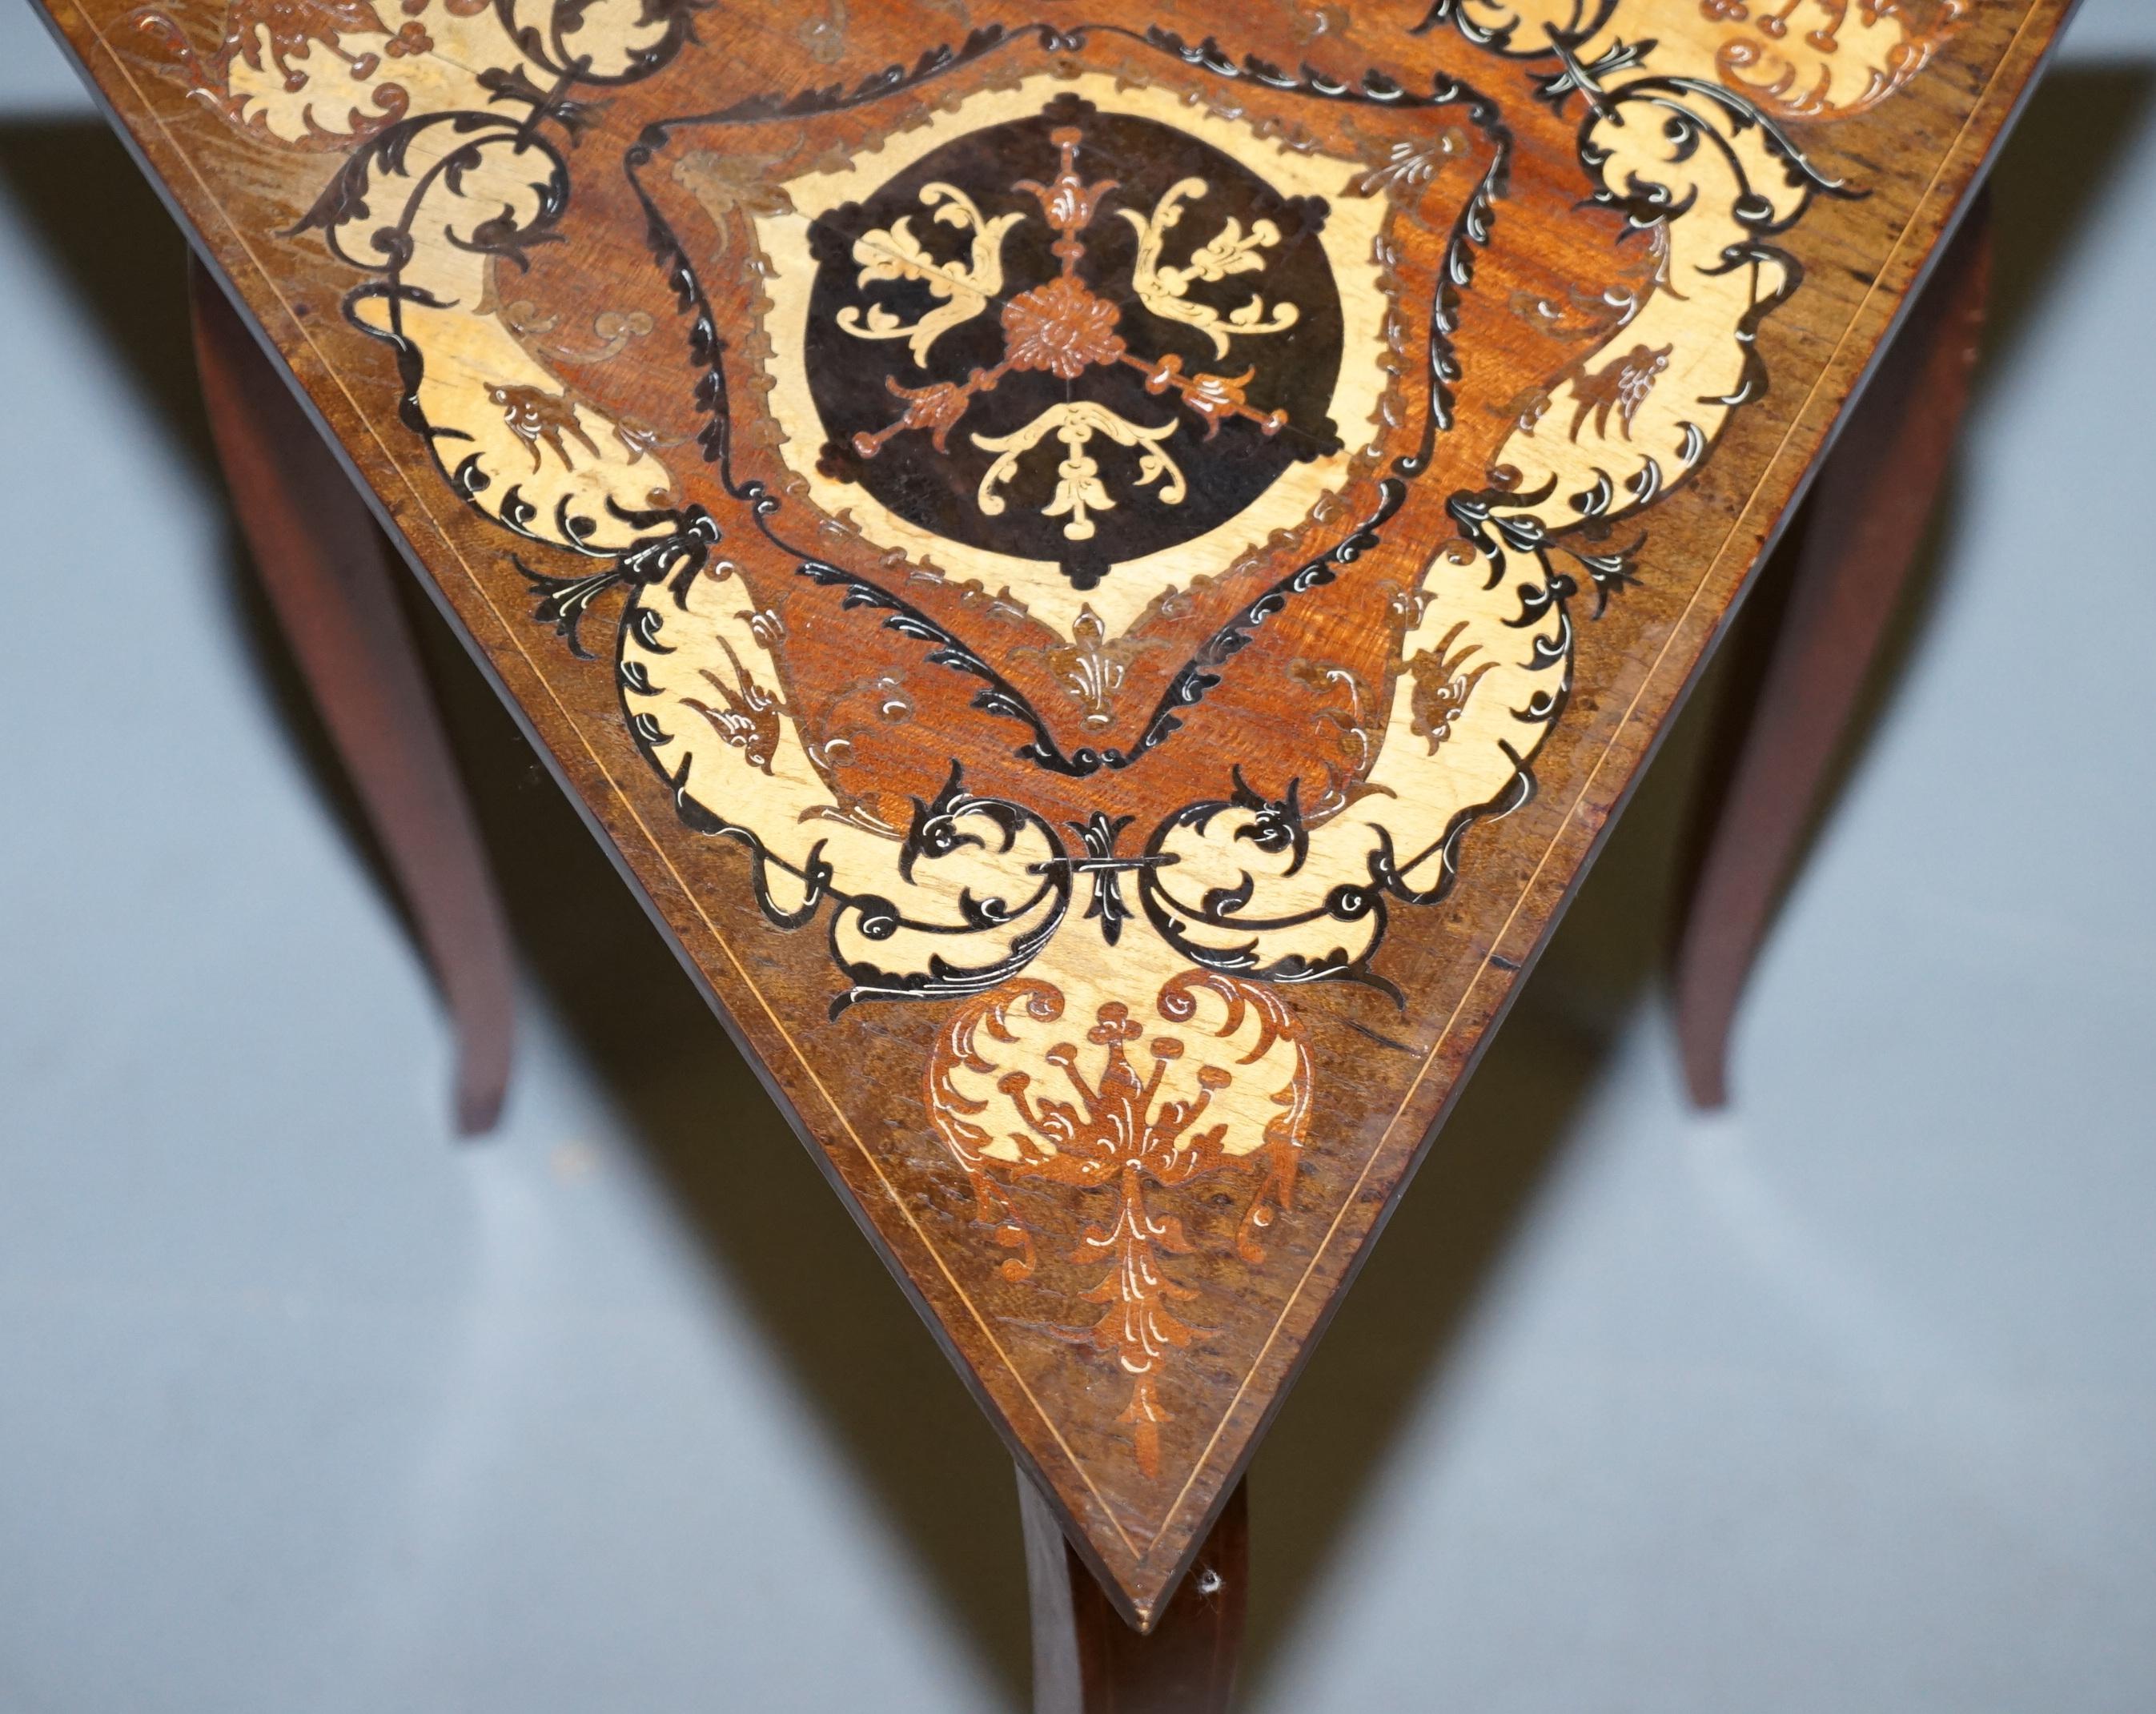 Modern Stunning Vintage Reuge Triangle Musical Side Table Marquetry Inlaid Ornate